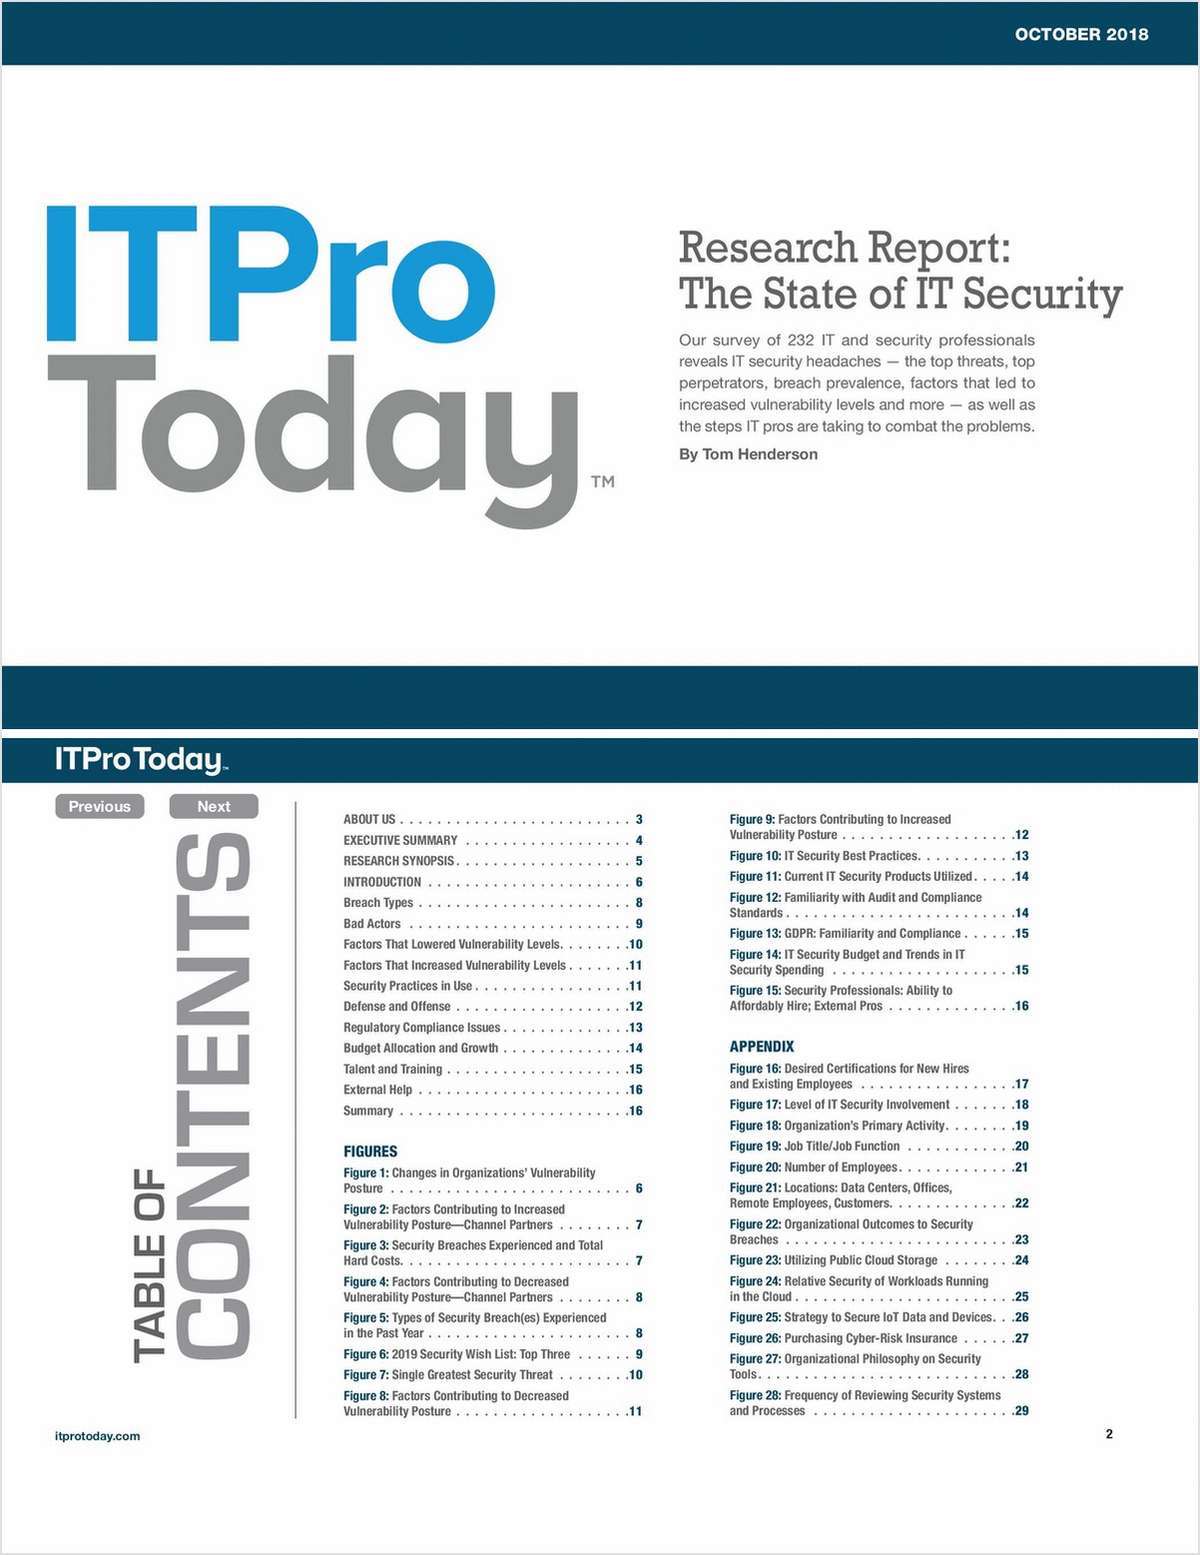 Research Report: The State of IT Security